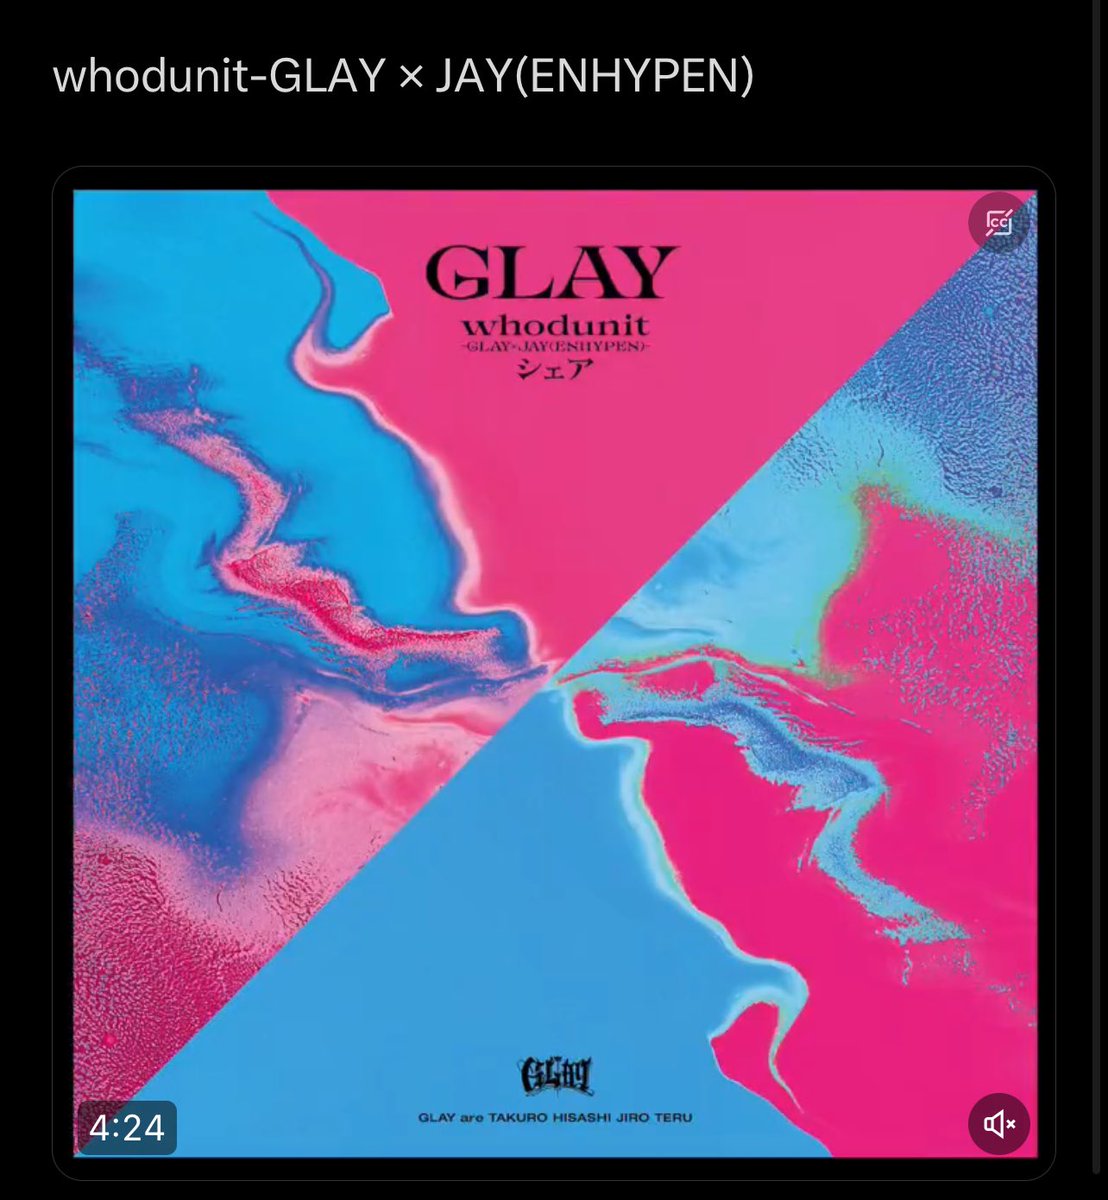 [RE: GLAY X JAY] The song was played on live broadcast in the FM802 Buggy Crash Night - (a radio channel by GLAY's JIRO) -however, we would also like to encourage everyone to please just wait for the release on May 29th. Spreading the full song across all platforms defeats the…